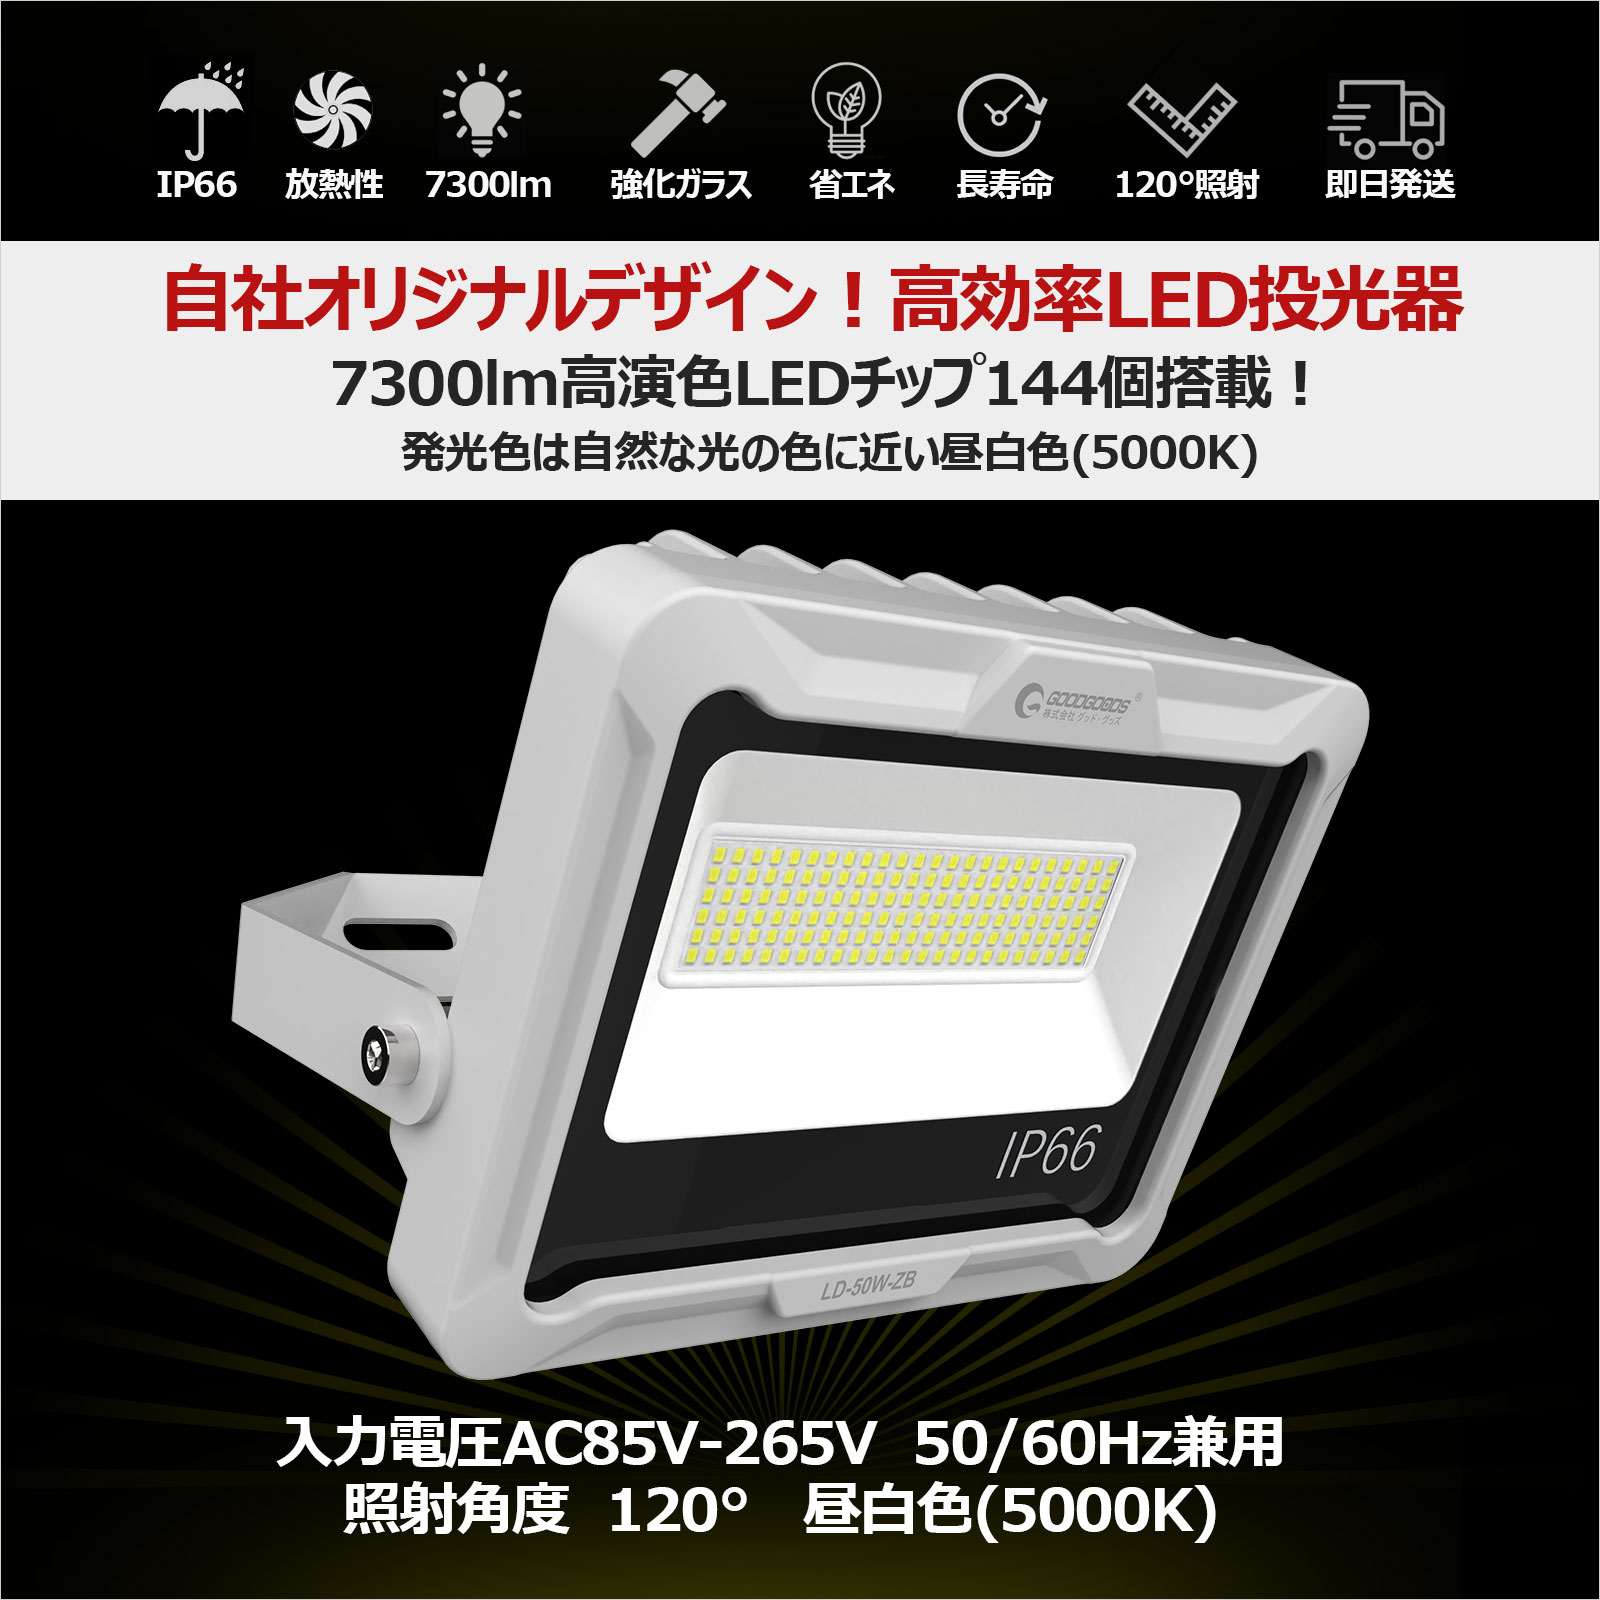 LED floodlight daytime white color 50W bright IP66 waterproof dustproof nighttime work large activity indoor outdoors endurance power saving long life 